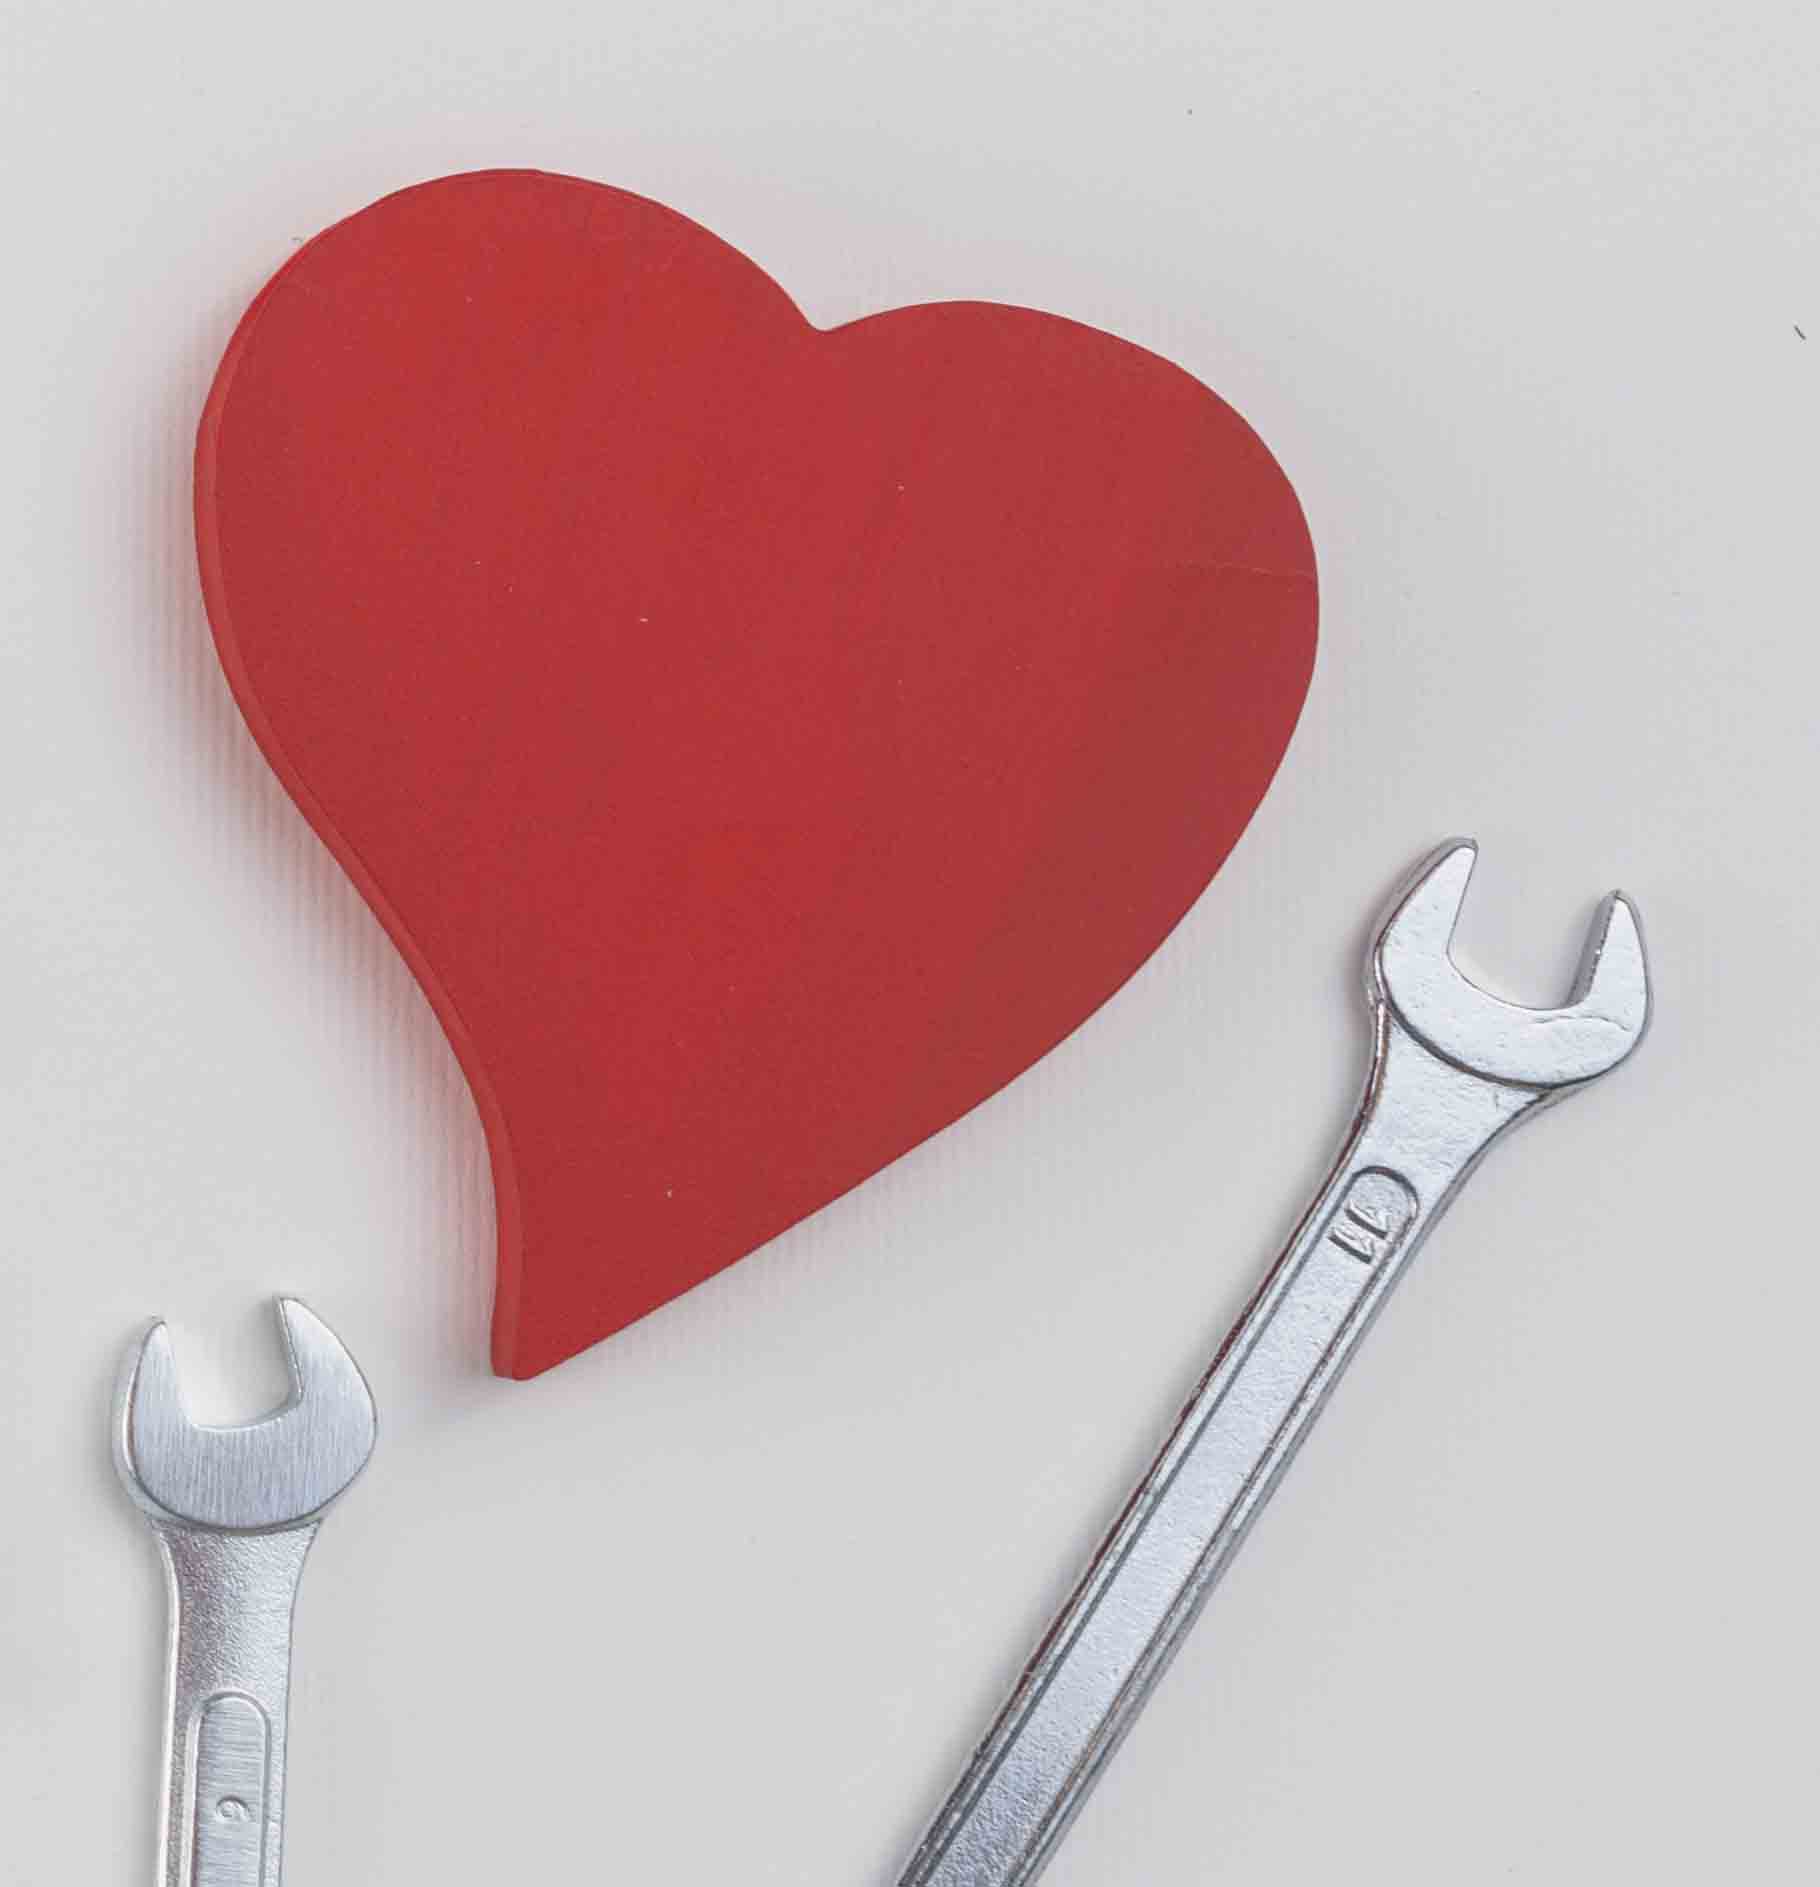 tools and a paper heart